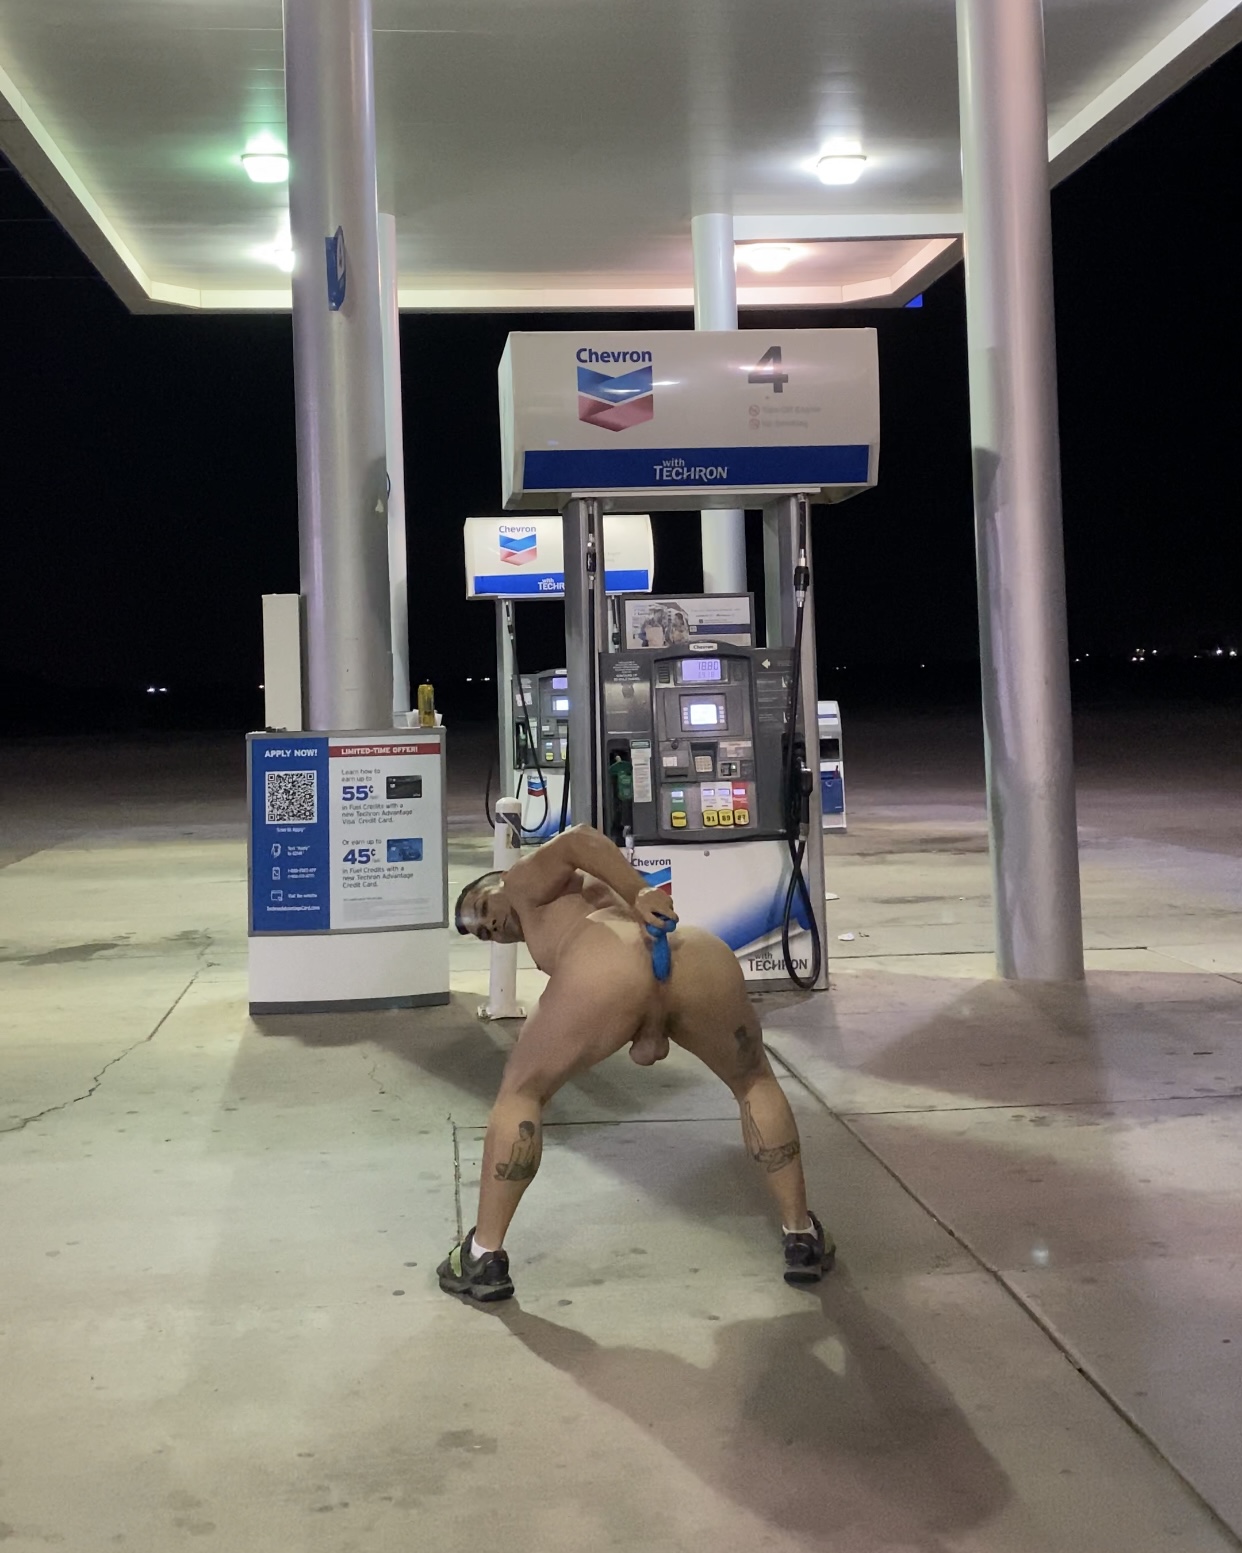 Exhibitionist Caught with Dildo at Gas Station